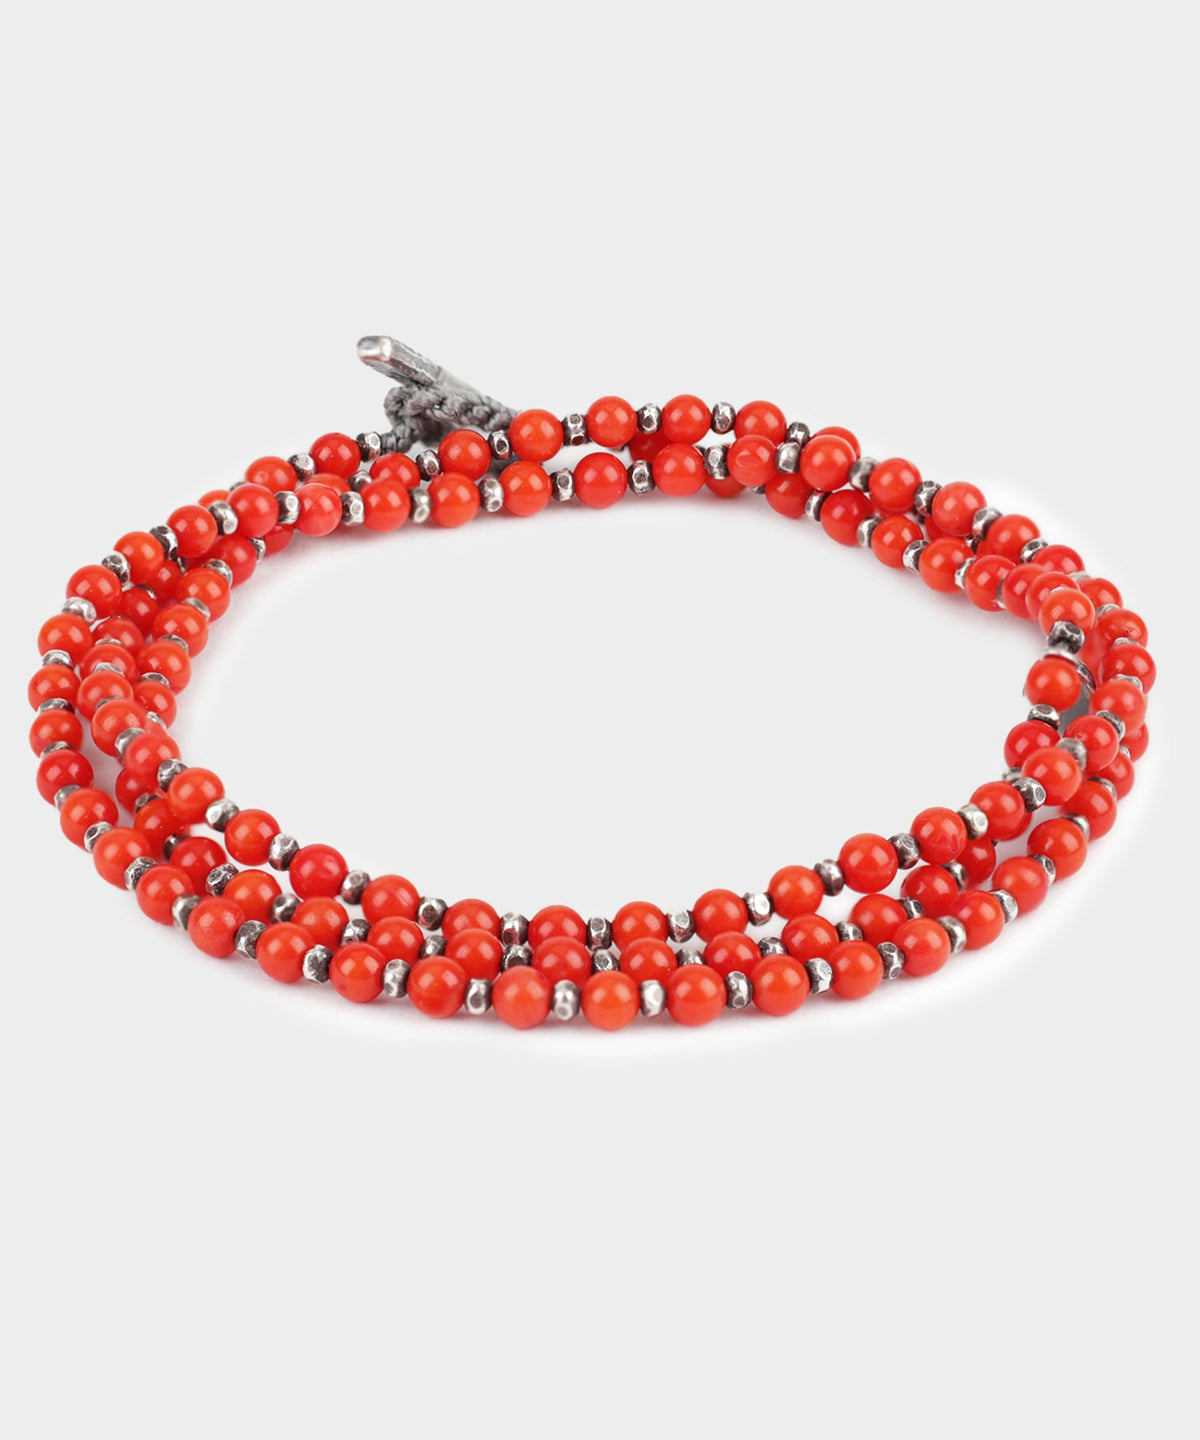 M. Cohen The Silver Agora Bracelet / Necklace in Red